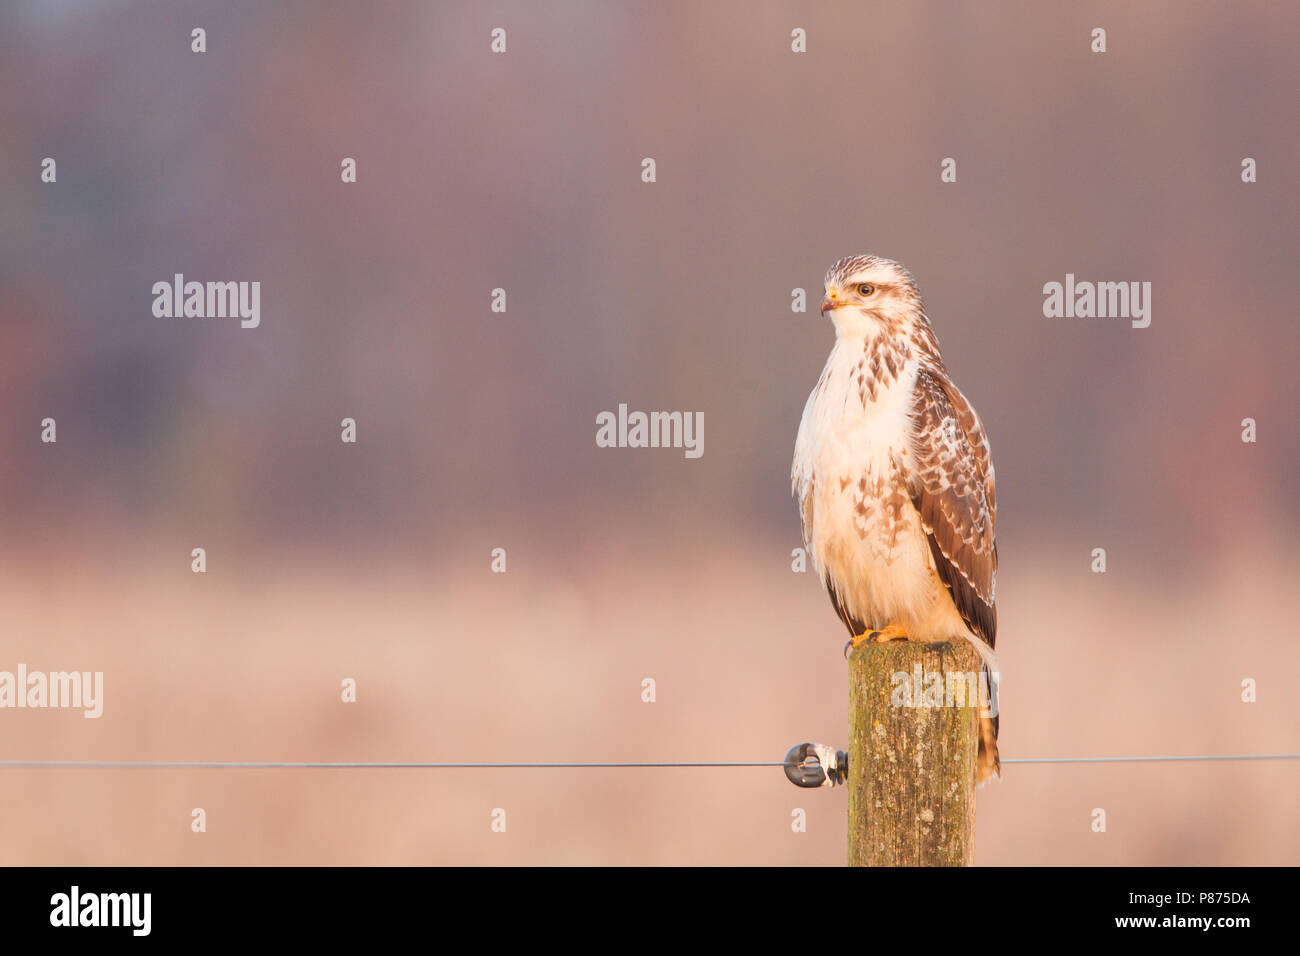 Buizerd op een paal, Common Buzzard perched on a pole Stock Photo